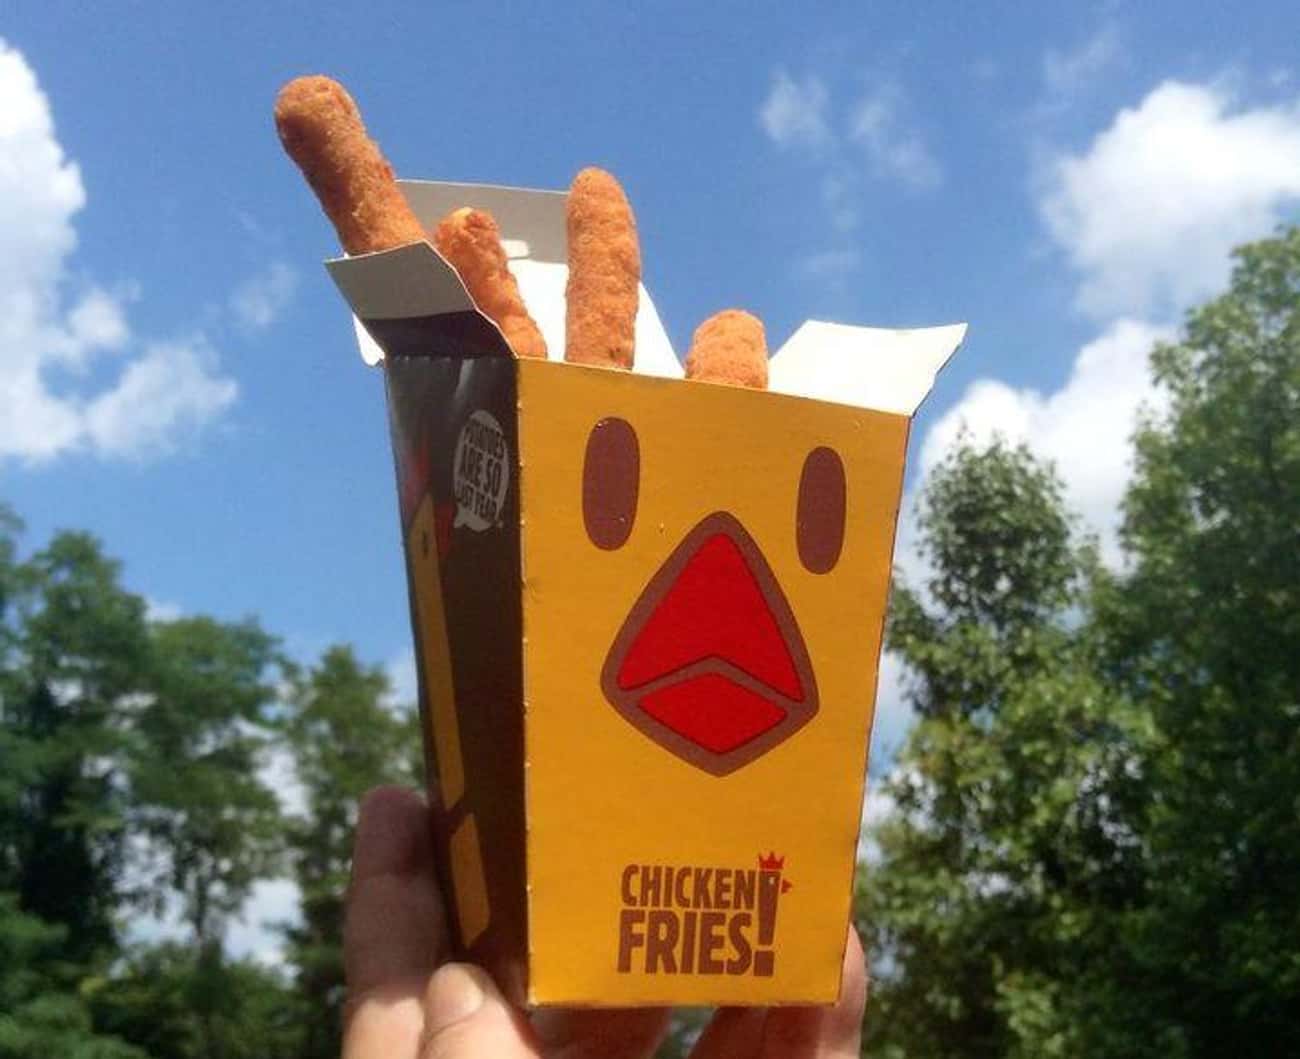 Early 2000s nostalgia - sky - Chicken Fries!